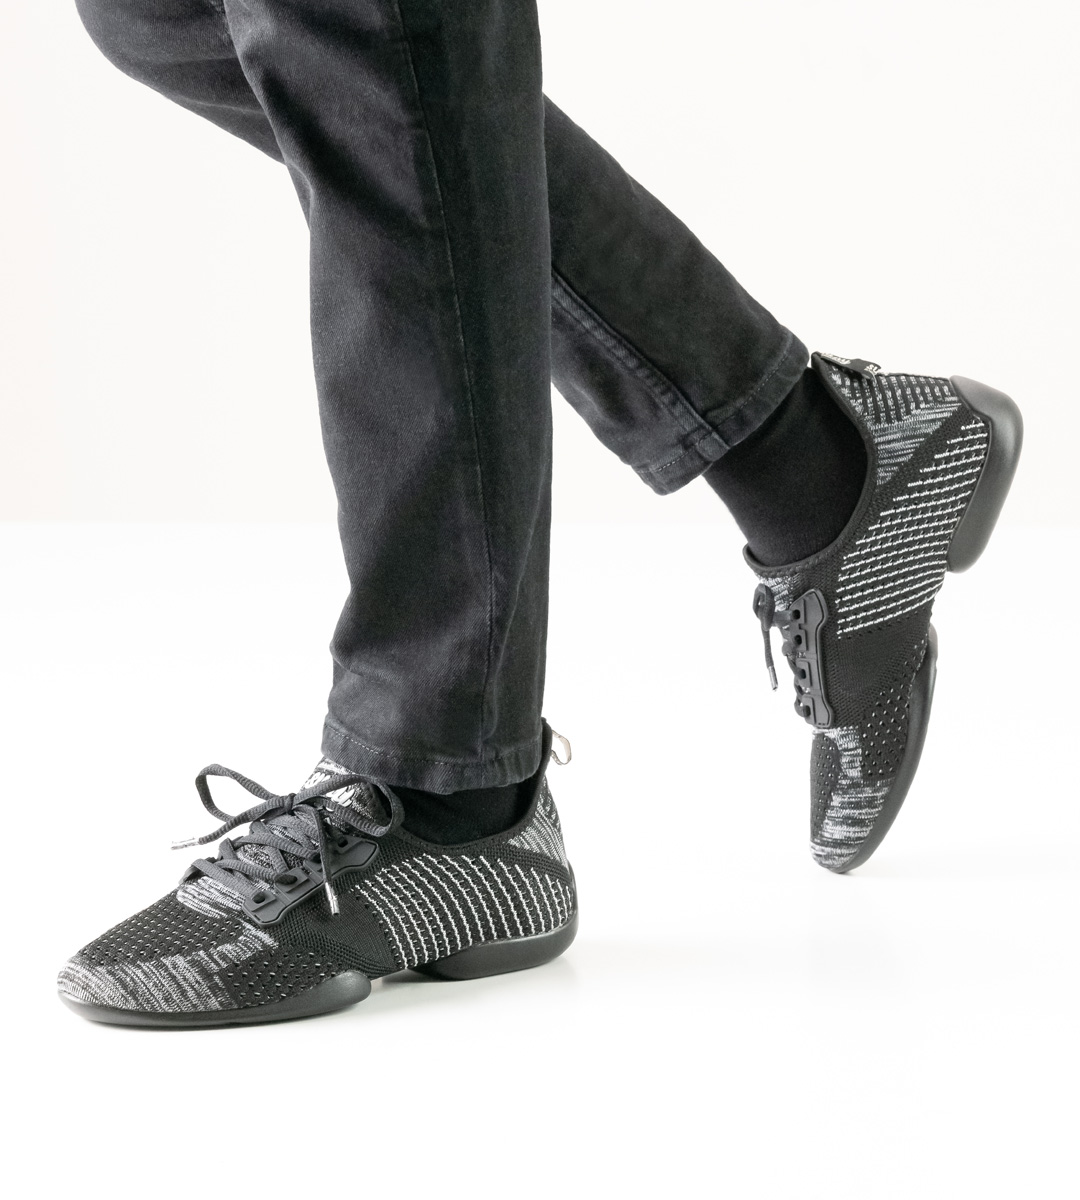 Black and grey men's dance sneaker by Suny in combination with black trousers